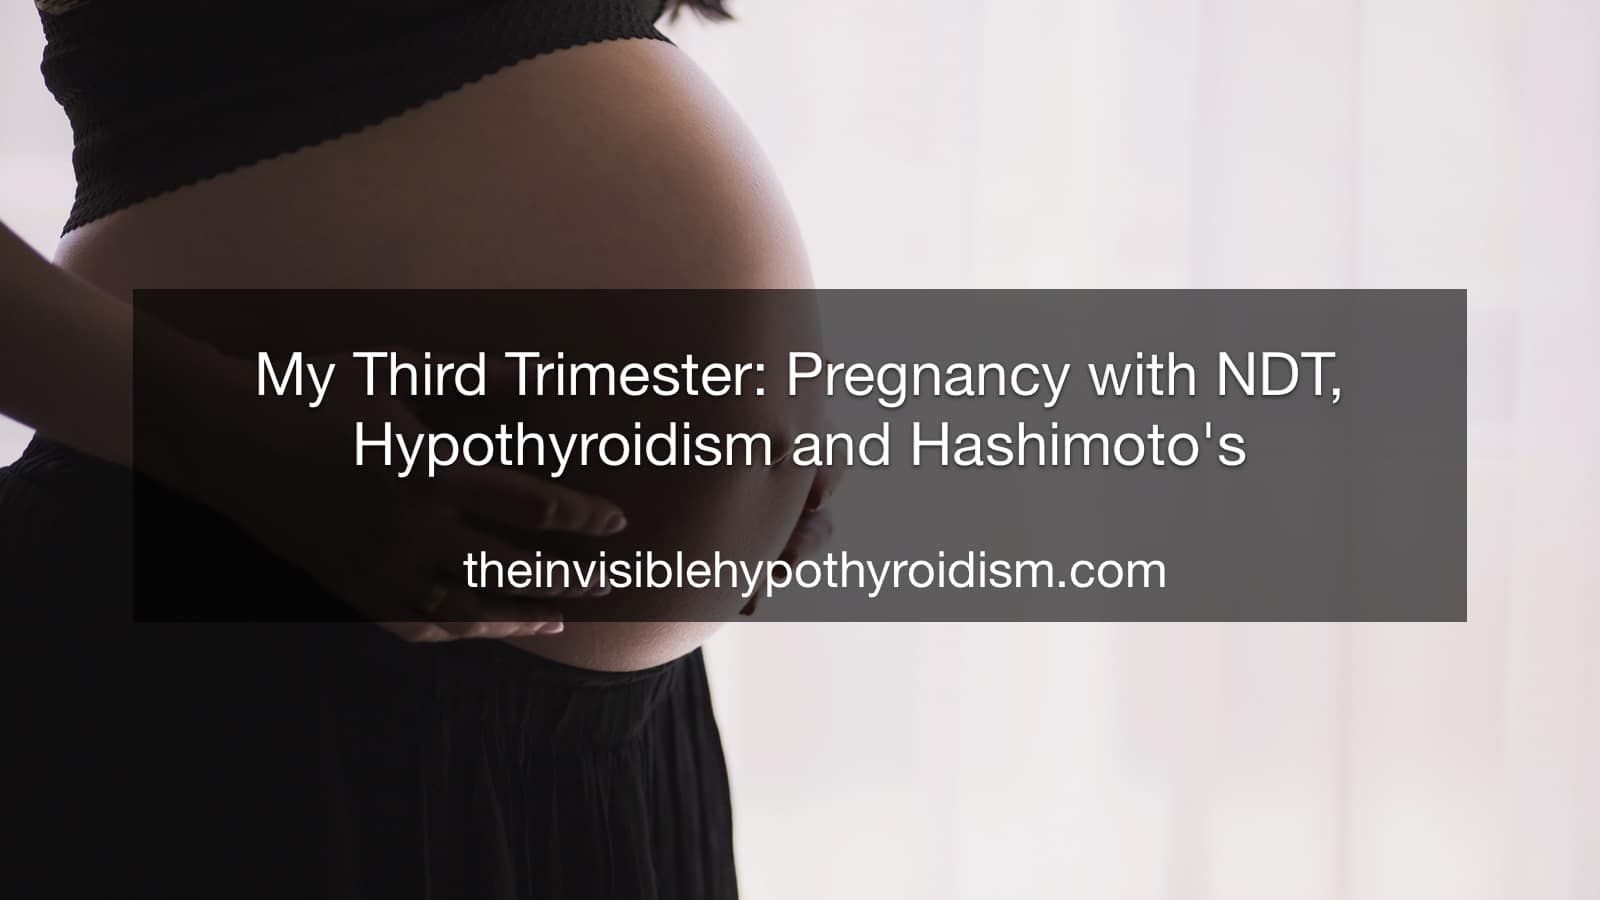 My Third Trimester: Pregnancy with NDT, Hypothyroidism and Hashimoto's